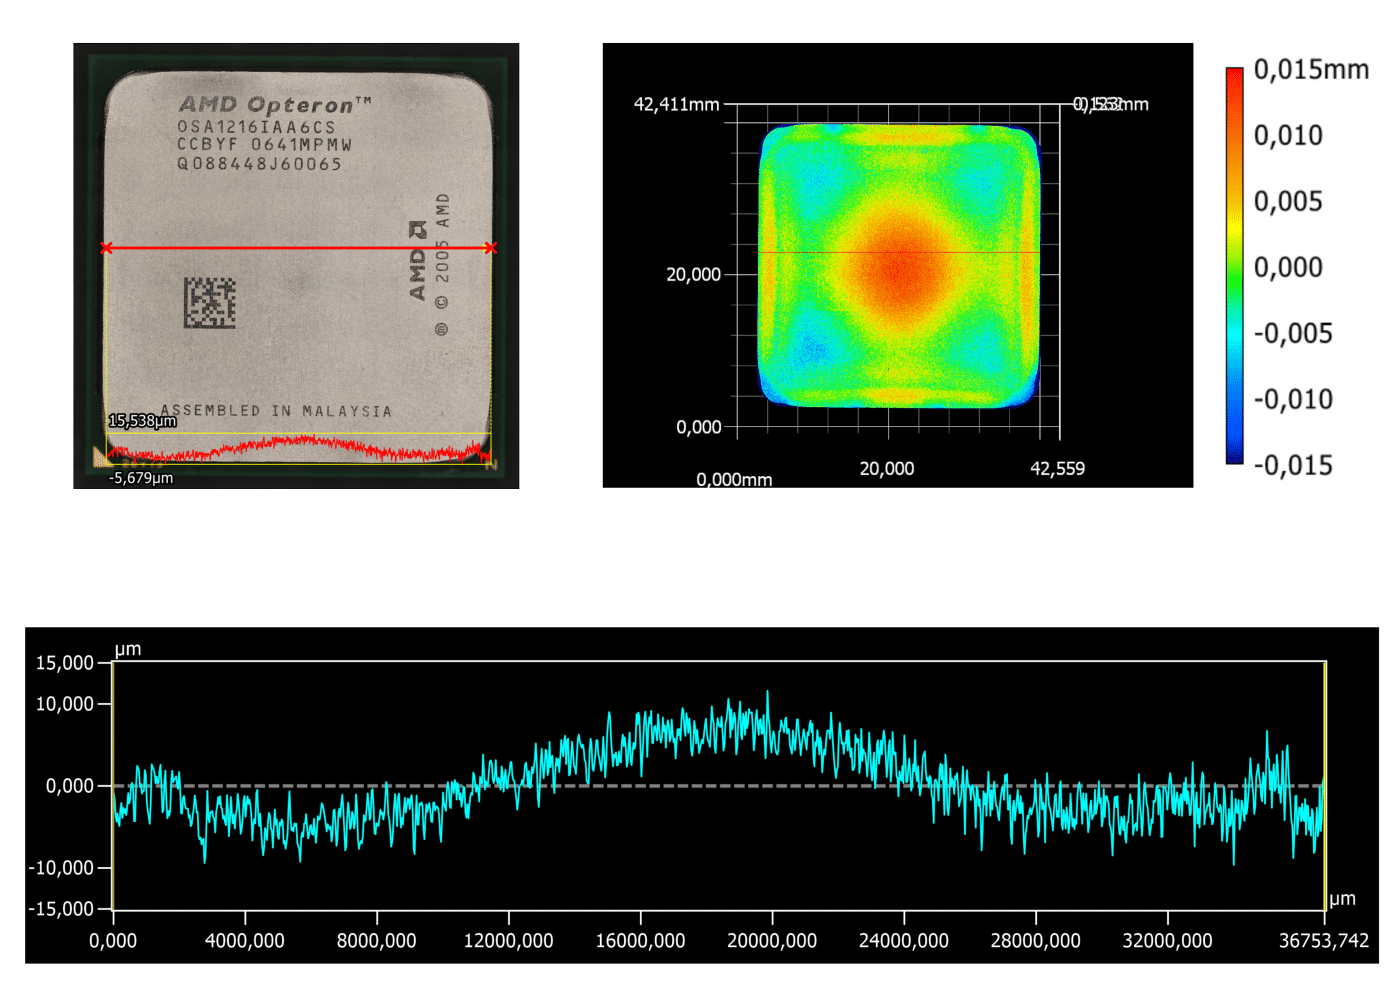 AMD Heatspreader through the ages - measurement data, curvature and surface